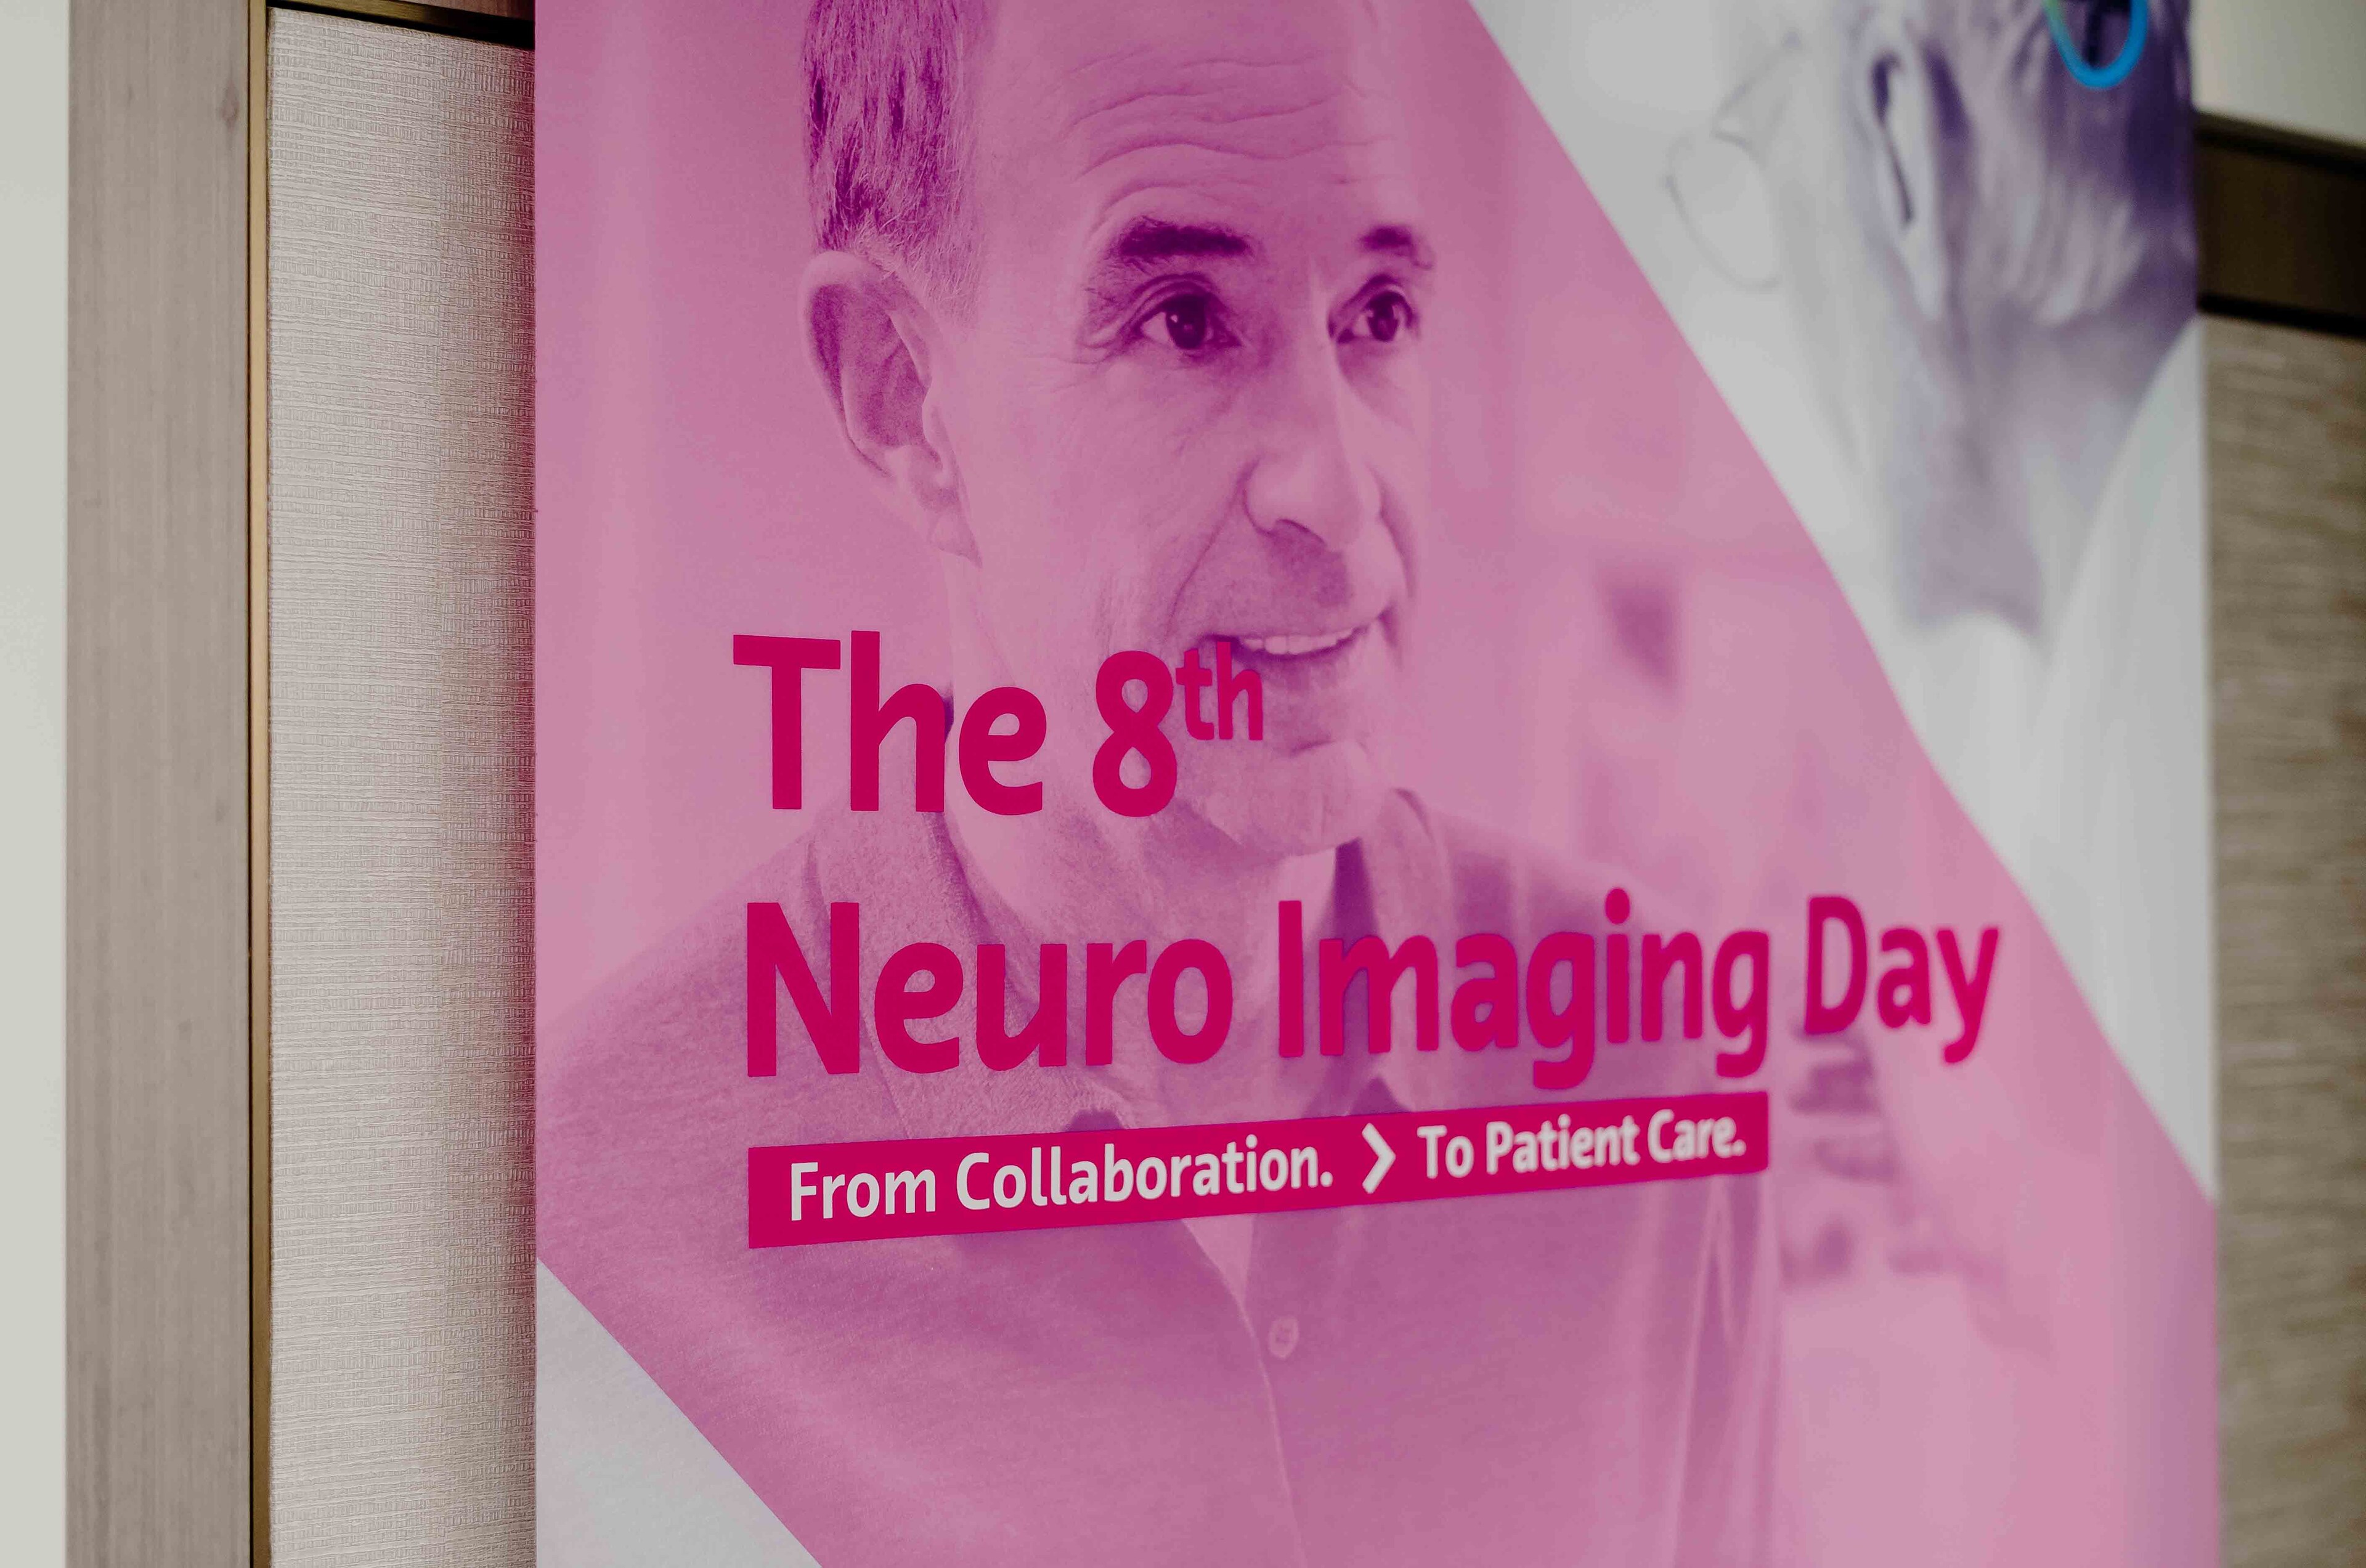 Neuro imaging day 2019 preview image